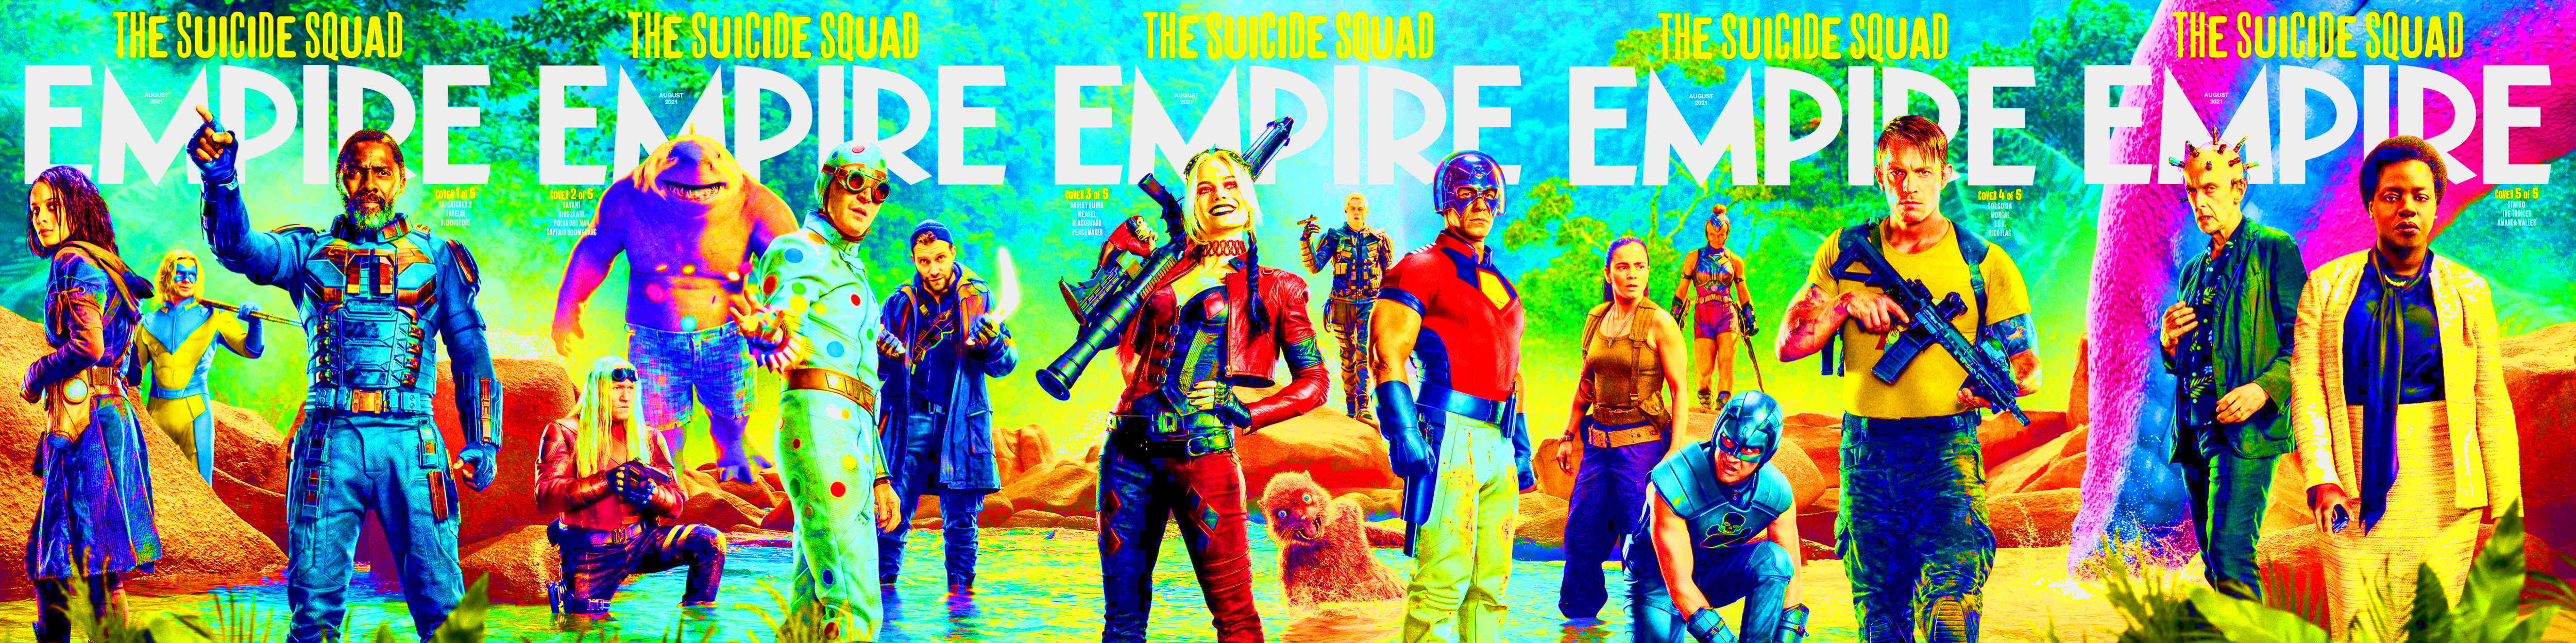 The Suicide Squad - Empire Magazine Covers - August 2021